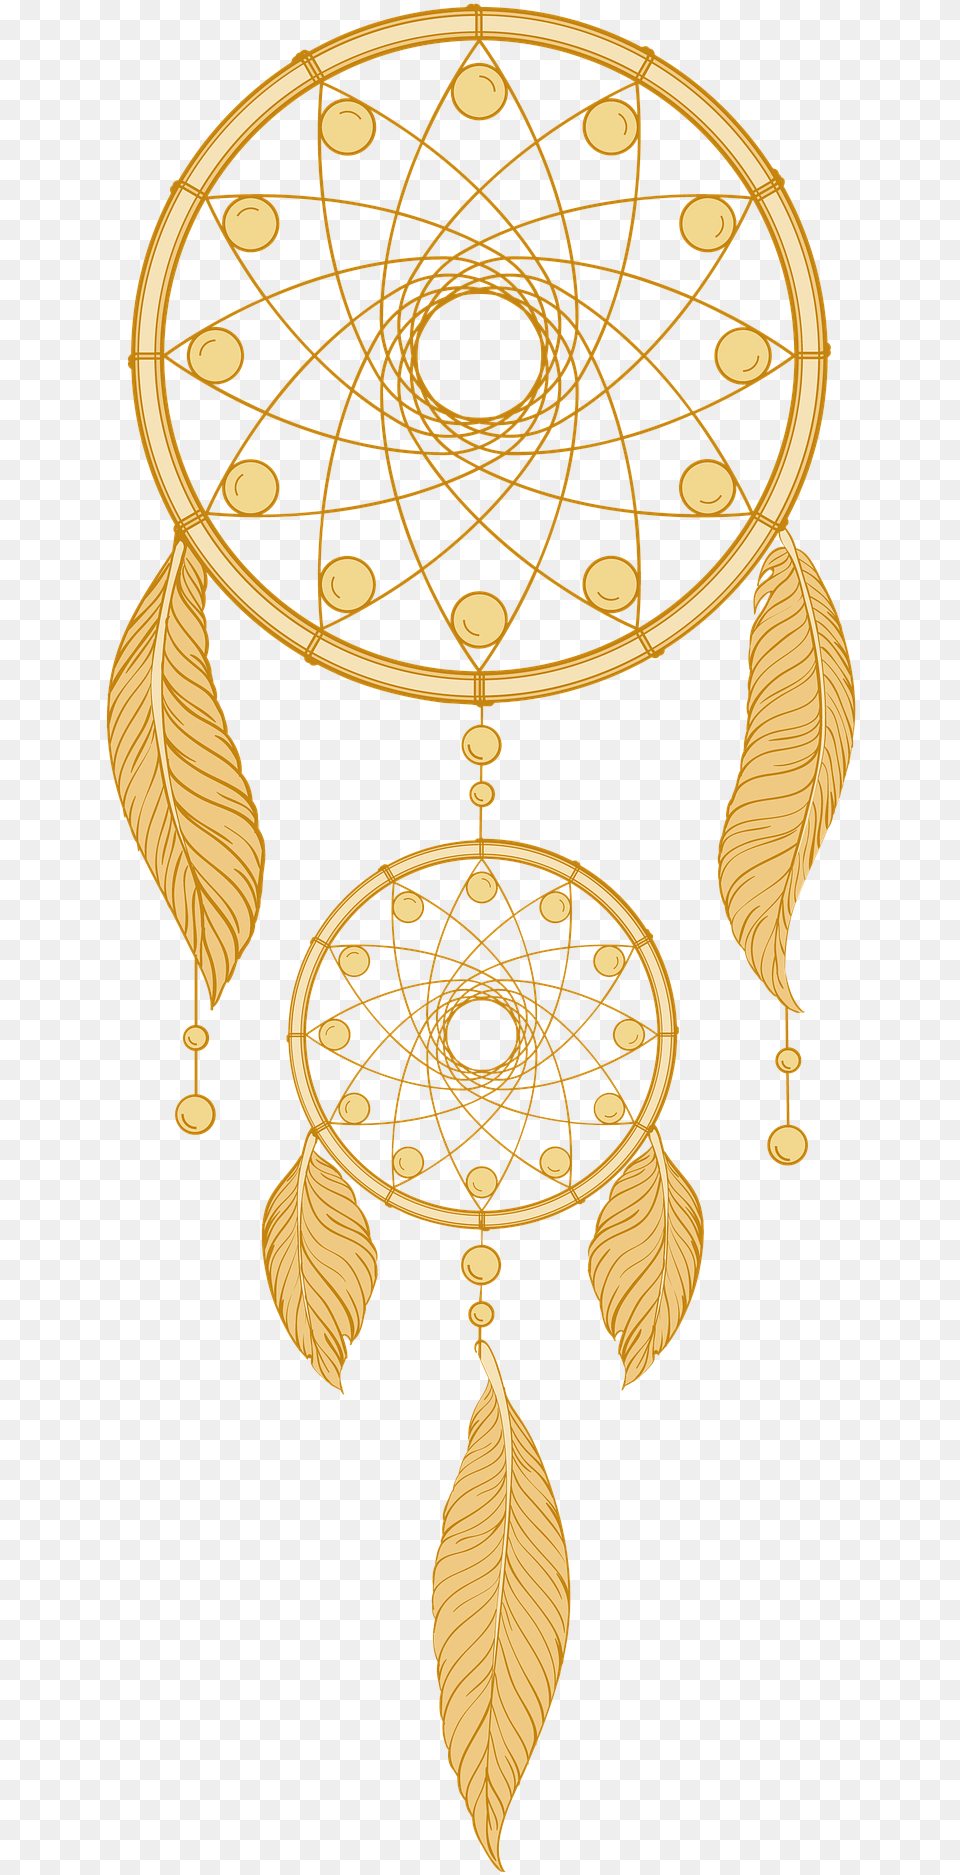 Download Wheel United Dreamcatcher States Americans In Dream Catcher Gold, Accessories, Earring, Jewelry, Chandelier Free Transparent Png